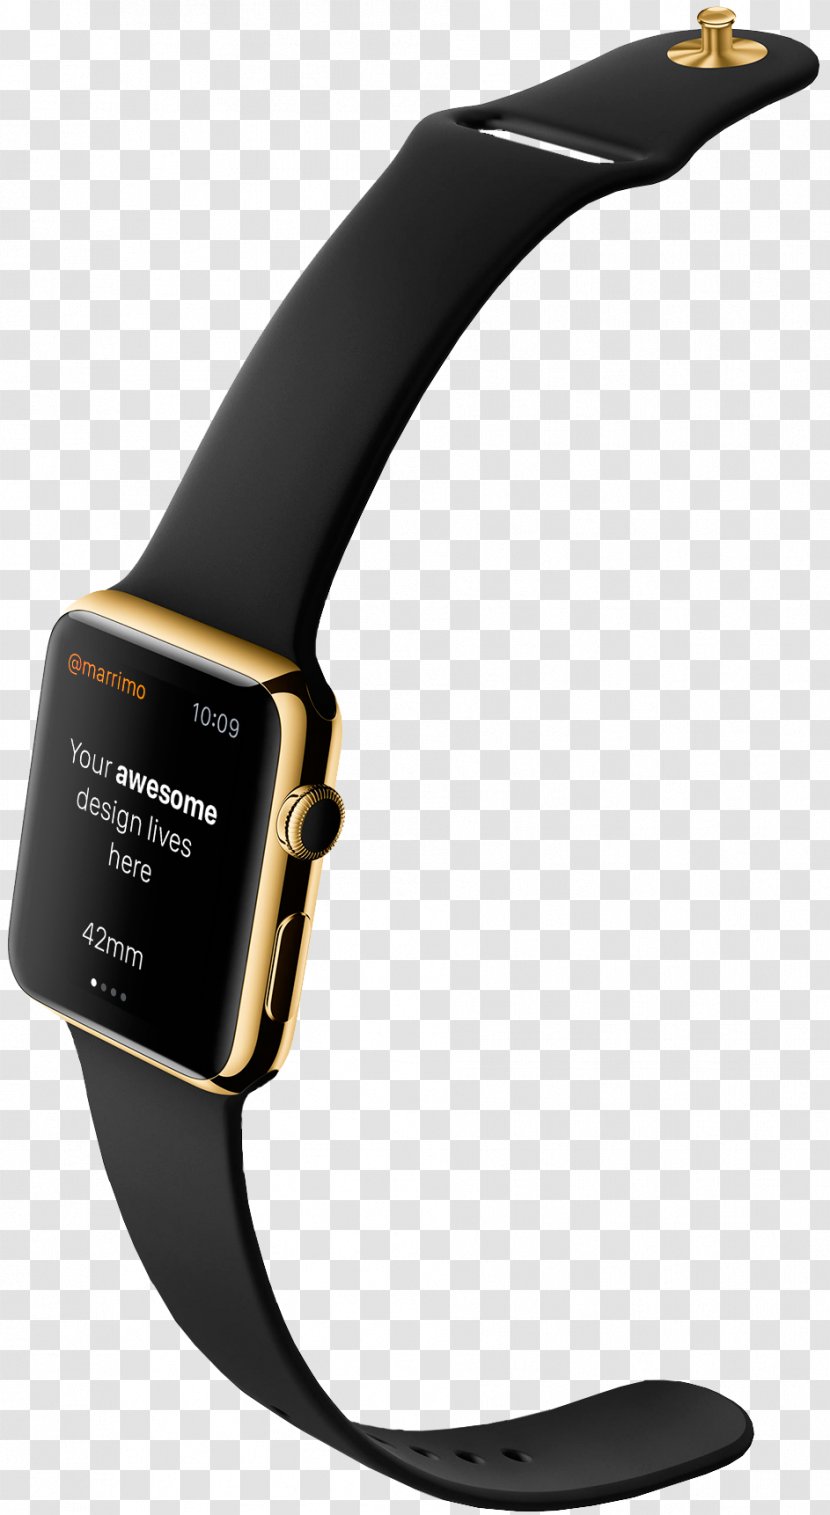 Apple Watch Series 2 3 Smartwatch - Hardware - Watches Transparent PNG